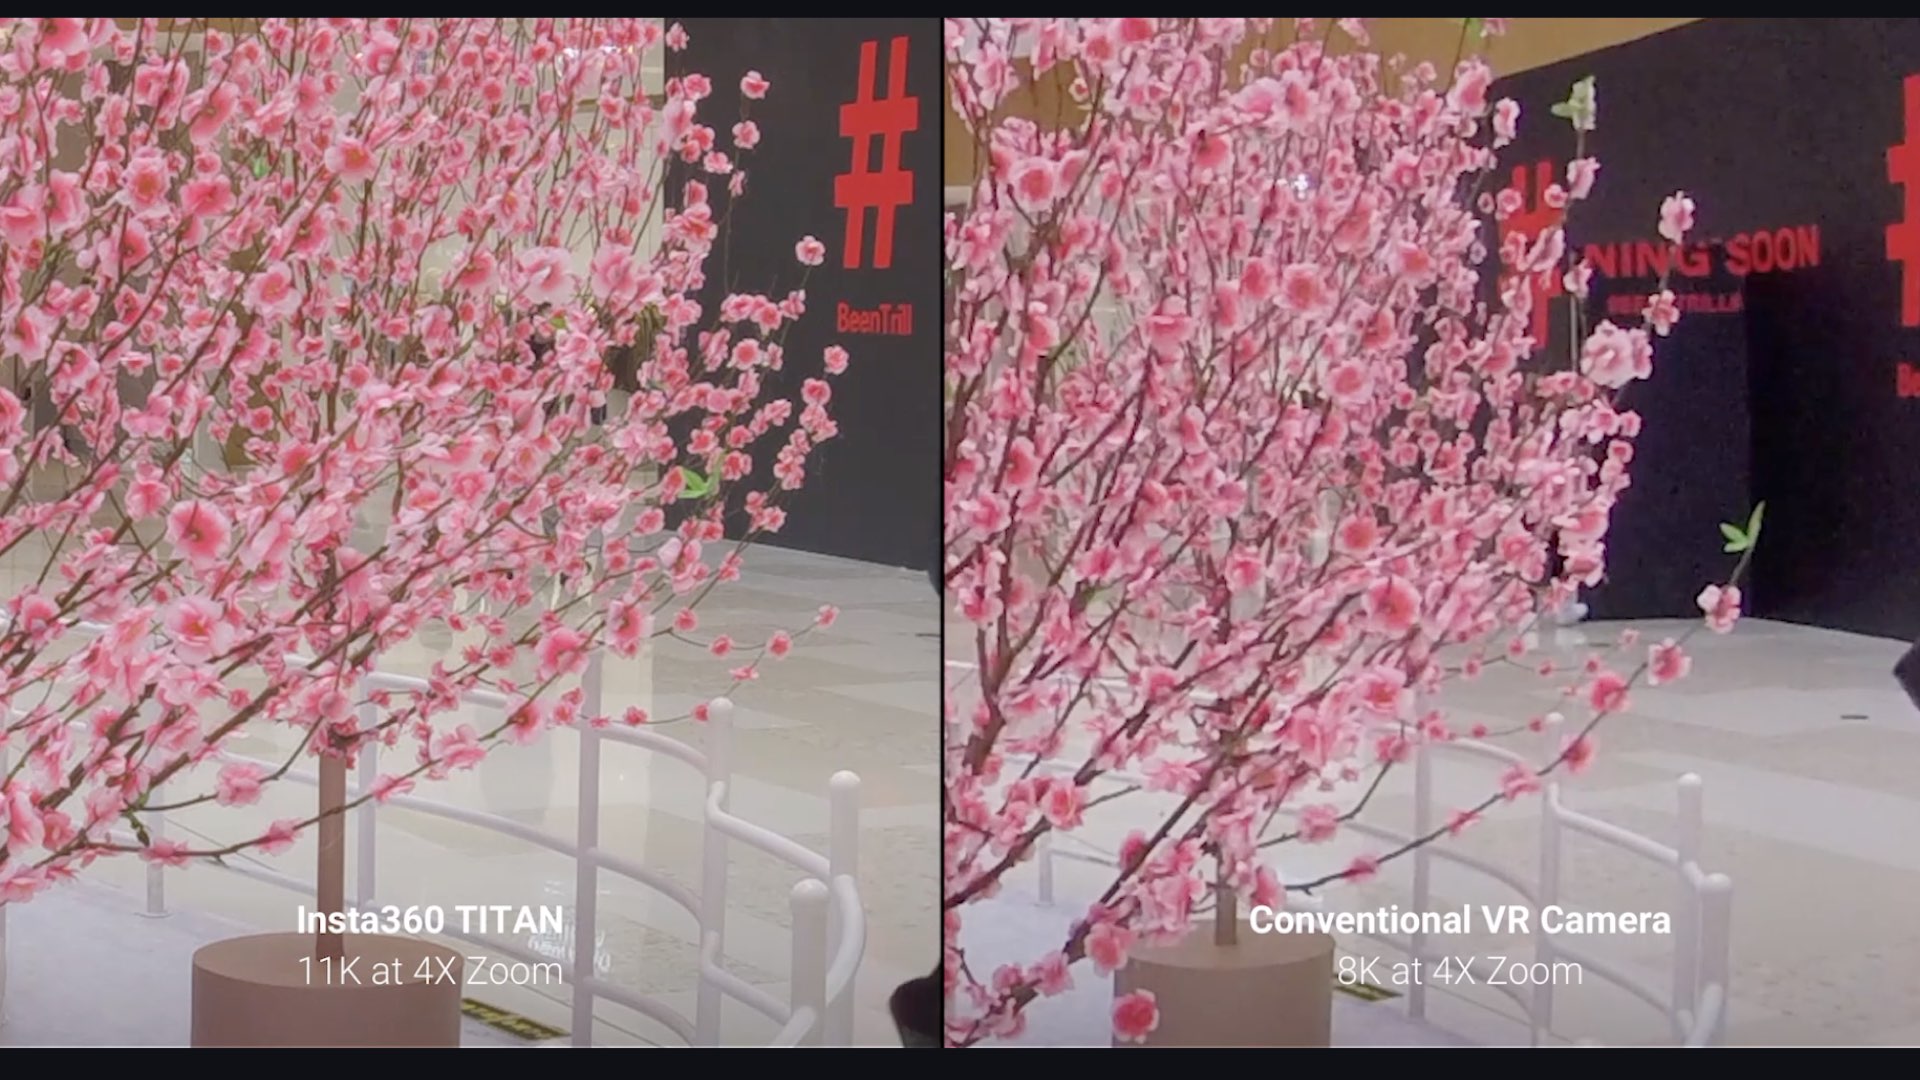 Image quality improvement of the Titan compared to other 8K VR cameras